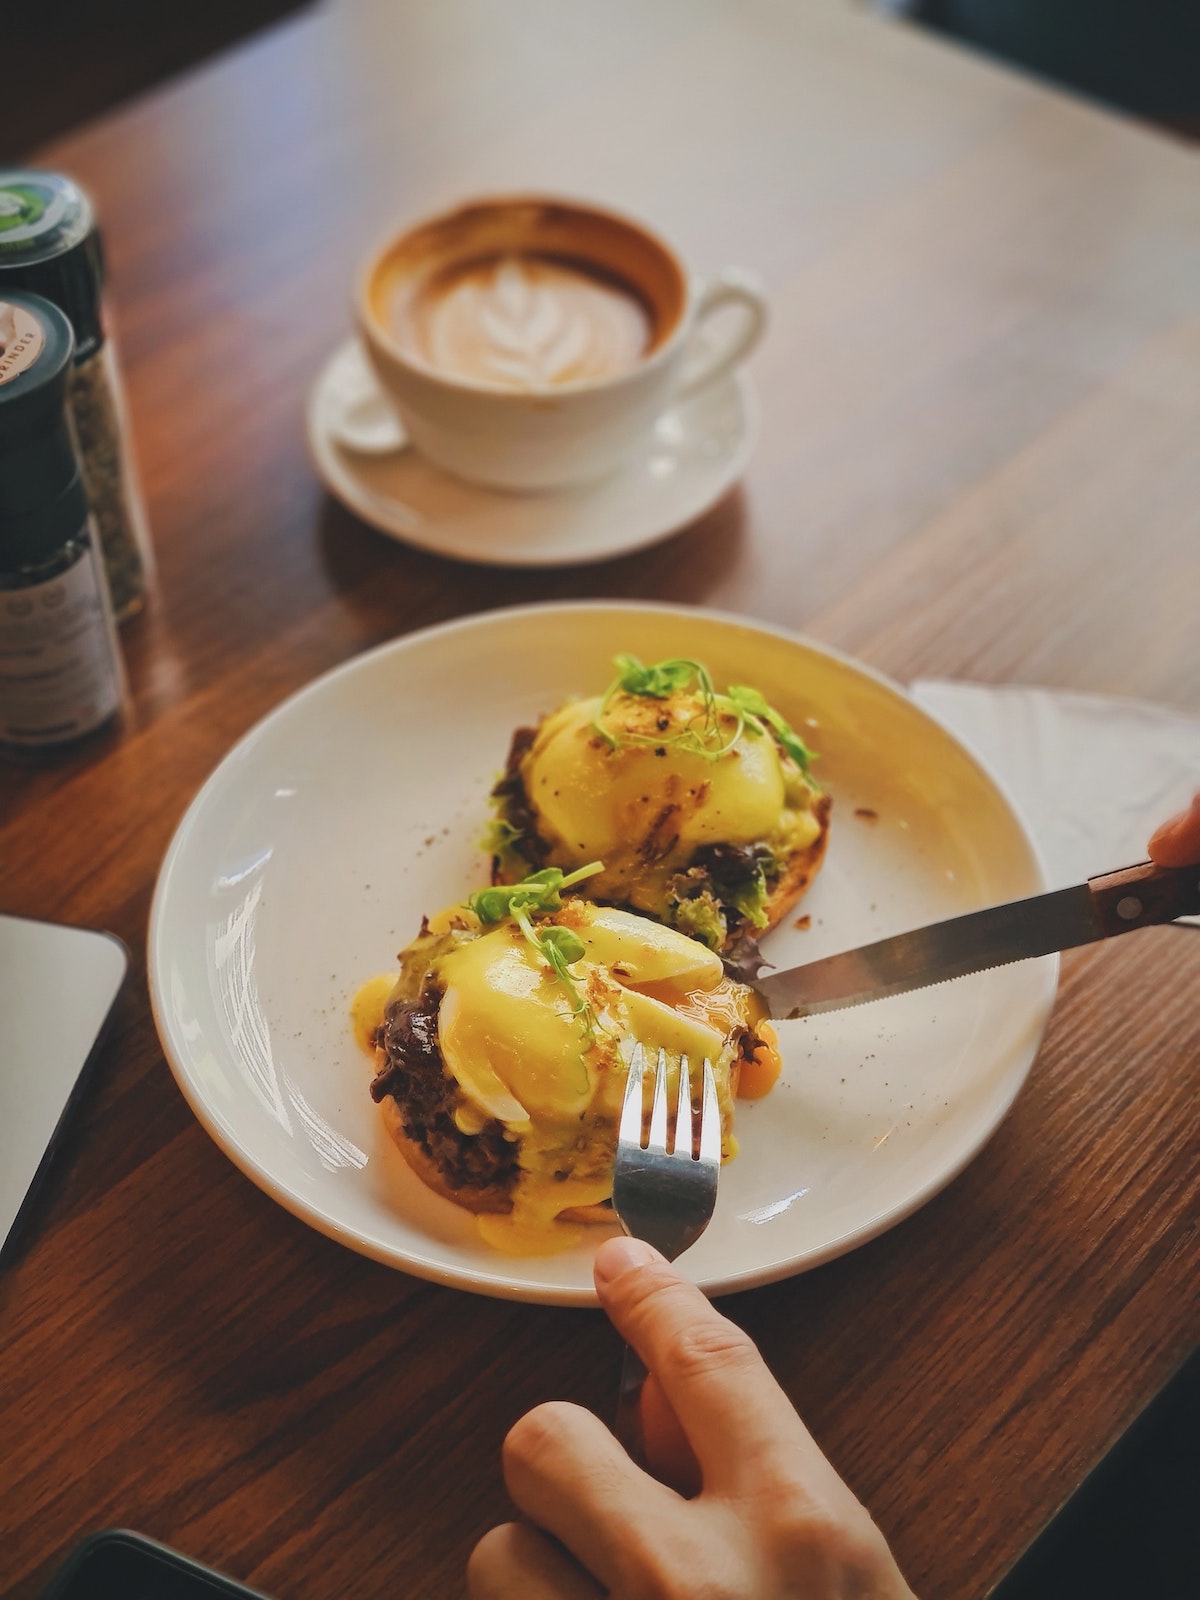 Person cutting into eggs Benedict with a cup of coffee on the table in the background